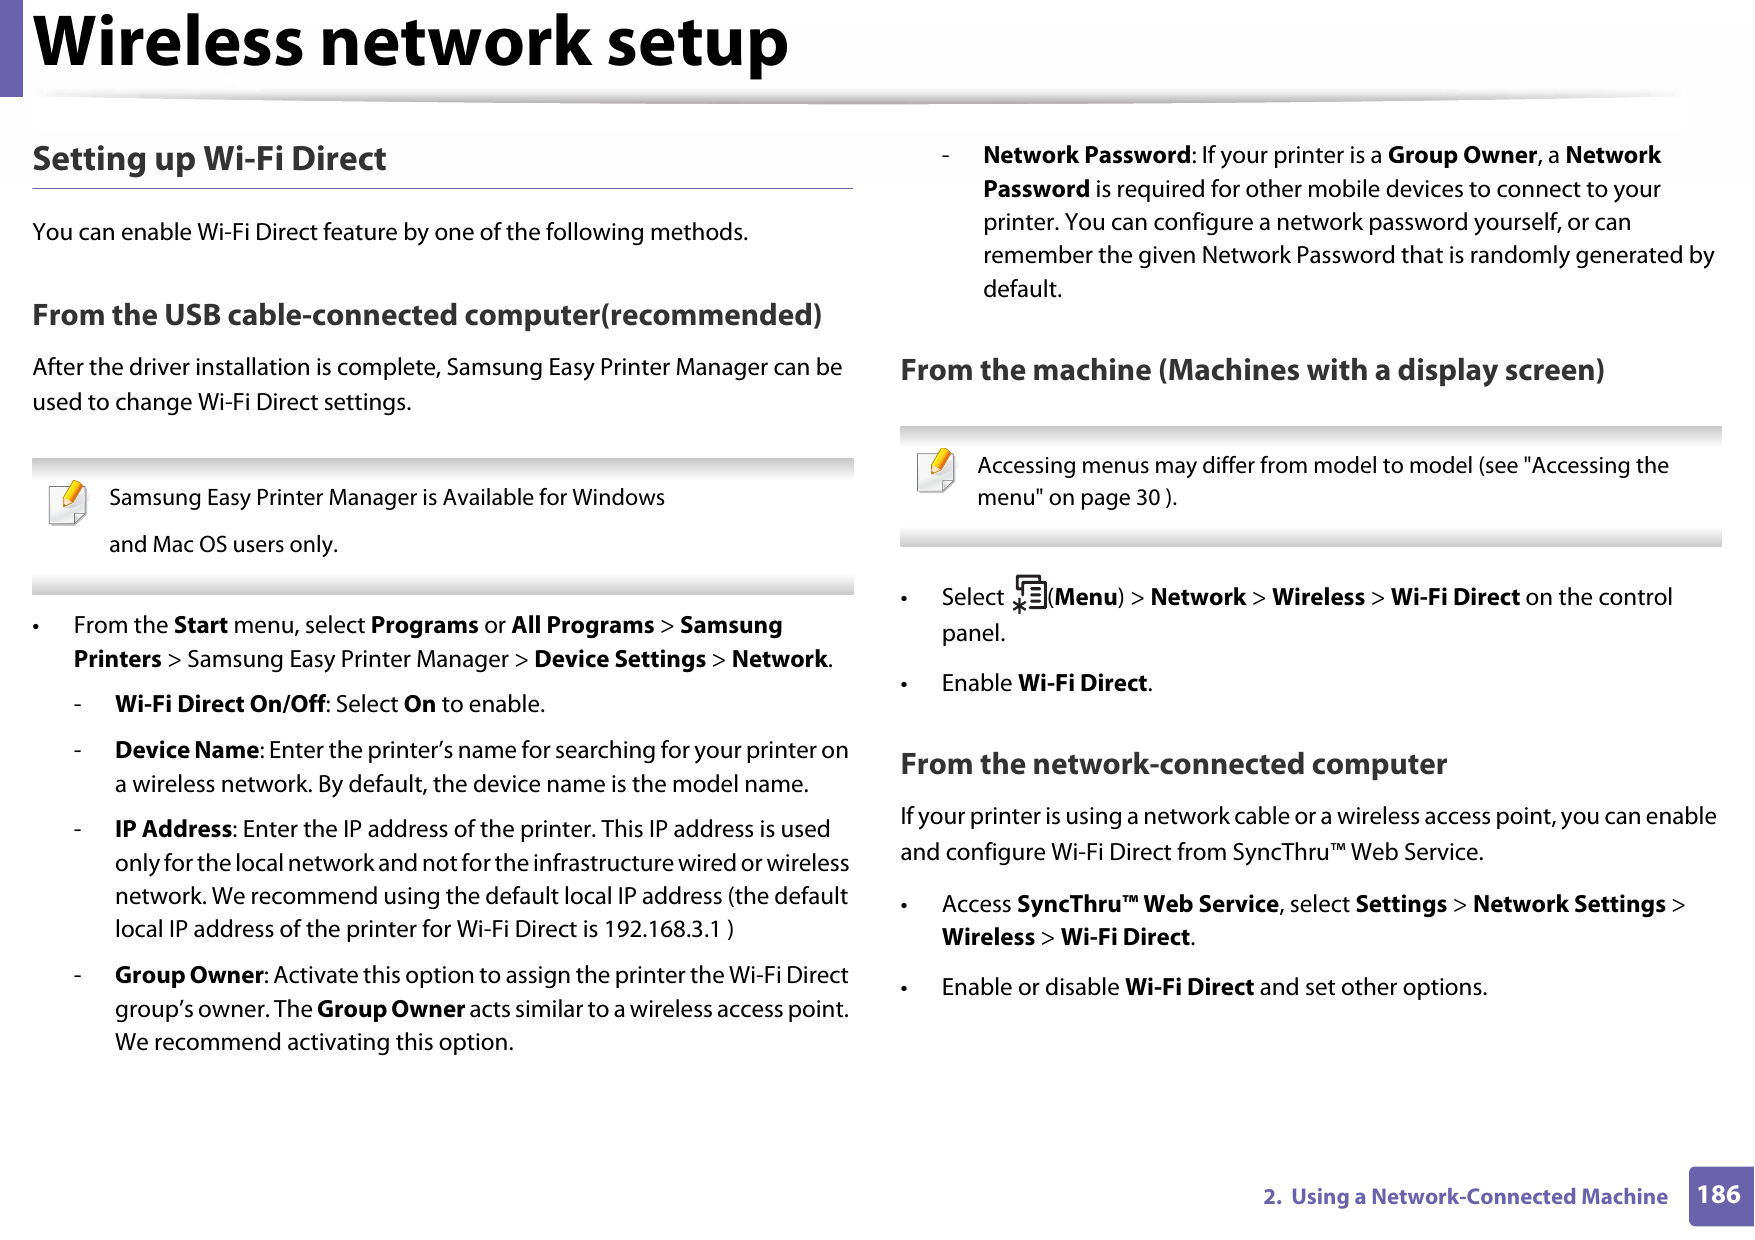 Wireless network setup1862.  Using a Network-Connected MachineSetting up Wi-Fi DirectYou can enable Wi-Fi Direct feature by one of the following methods.From the USB cable-connected computer(recommended)After the driver installation is complete, Samsung Easy Printer Manager can be used to change Wi-Fi Direct settings. Samsung Easy Printer Manager is Available for Windowsand Mac OS users only. • From the Start menu, select Programs or All Programs &gt; Samsung Printers &gt; Samsung Easy Printer Manager &gt; Device Settings &gt; Network.-Wi-Fi Direct On/Off: Select On to enable.-Device Name: Enter the printer’s name for searching for your printer on a wireless network. By default, the device name is the model name.-IP Address: Enter the IP address of the printer. This IP address is used only for the local network and not for the infrastructure wired or wireless network. We recommend using the default local IP address (the default local IP address of the printer for Wi-Fi Direct is 192.168.3.1 )-Group Owner: Activate this option to assign the printer the Wi-Fi Direct group’s owner. The Group Owner acts similar to a wireless access point. We recommend activating this option.-Network Password: If your printer is a Group Owner, a Network Password is required for other mobile devices to connect to your printer. You can configure a network password yourself, or can remember the given Network Password that is randomly generated by default.From the machine (Machines with a display screen) Accessing menus may differ from model to model (see &quot;Accessing the menu&quot; on page 30 ). • Select (Menu) &gt; Network &gt; Wireless &gt; Wi-Fi Direct on the control panel.•Enable Wi-Fi Direct.From the network-connected computerIf your printer is using a network cable or a wireless access point, you can enable and configure Wi-Fi Direct from SyncThru™ Web Service.• Access SyncThru™ Web Service, select Settings &gt; Network Settings &gt; Wireless &gt; Wi-Fi Direct.• Enable or disable Wi-Fi Direct and set other options.